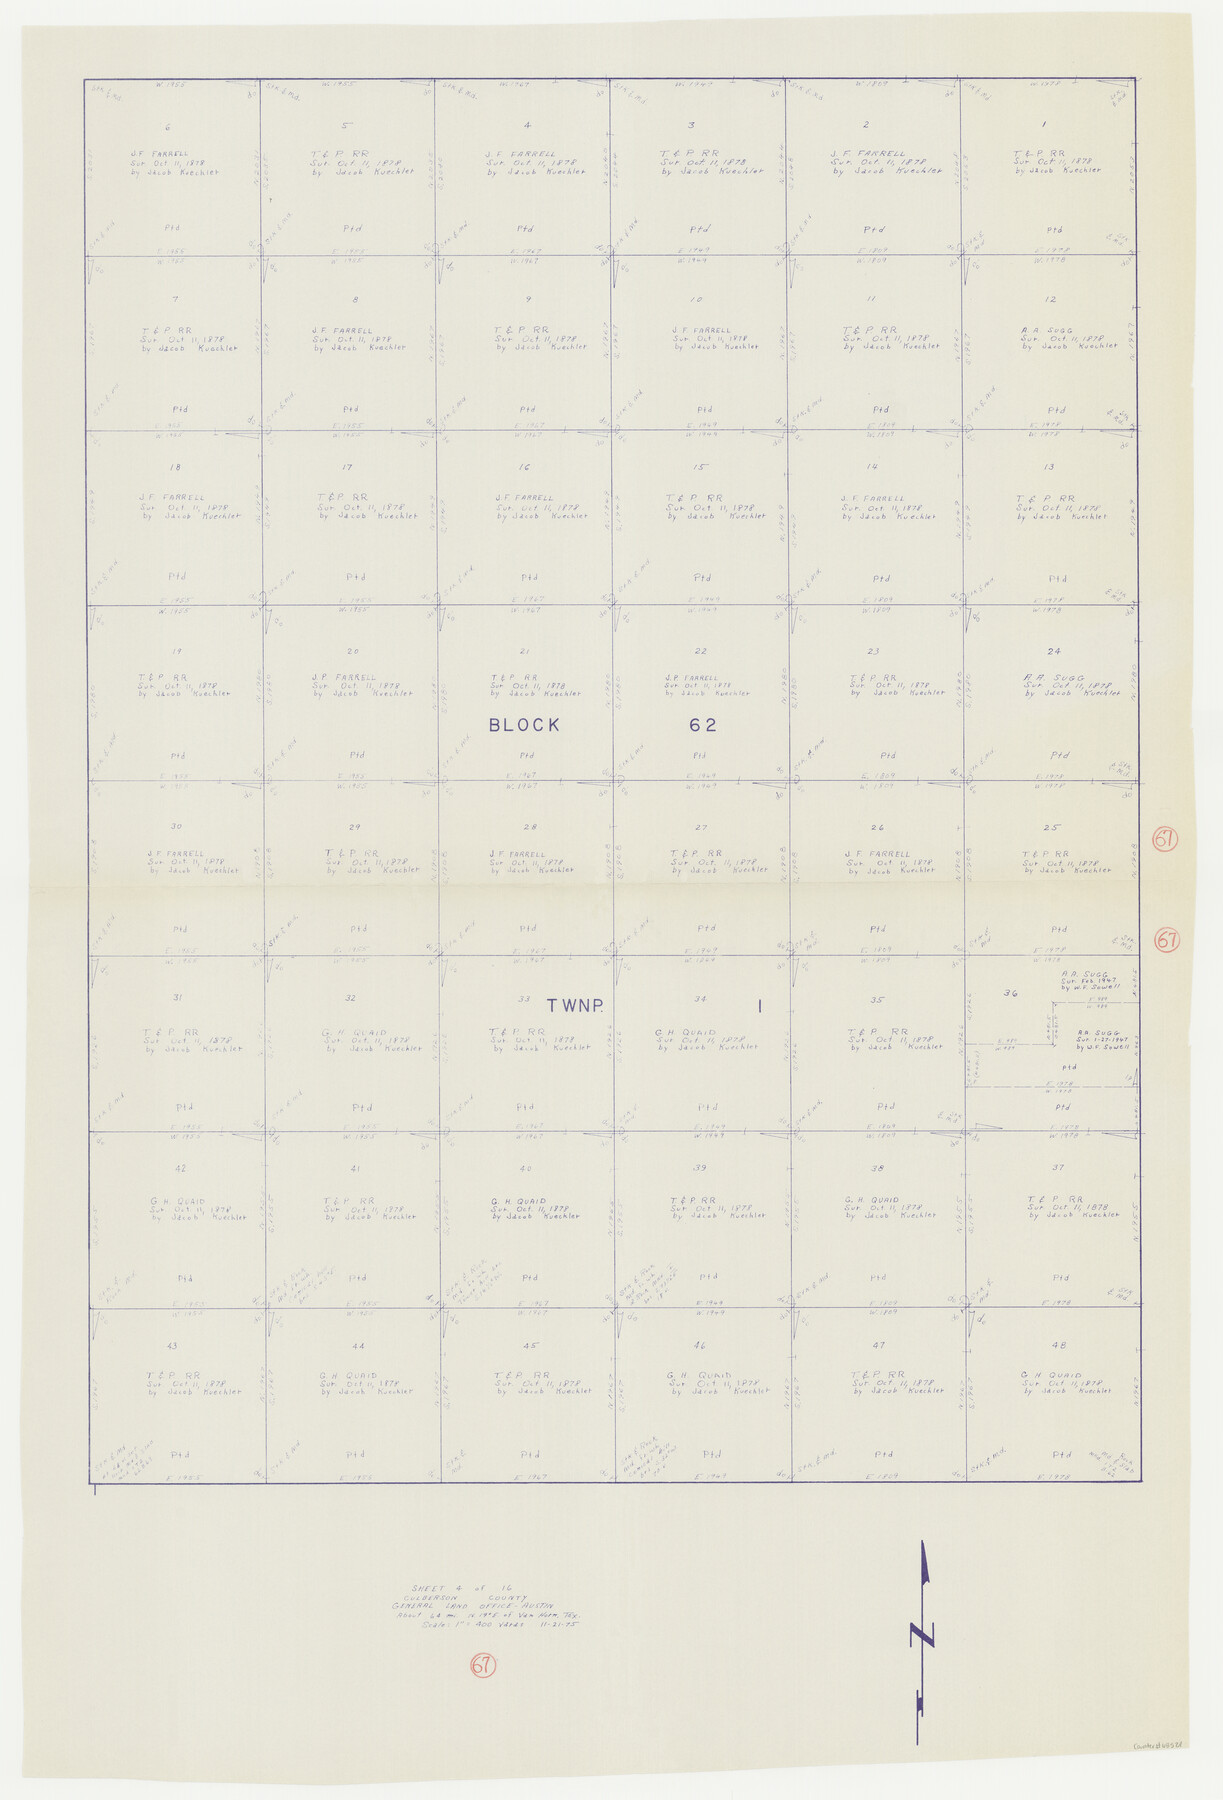 68521, Culberson County Working Sketch 67, General Map Collection